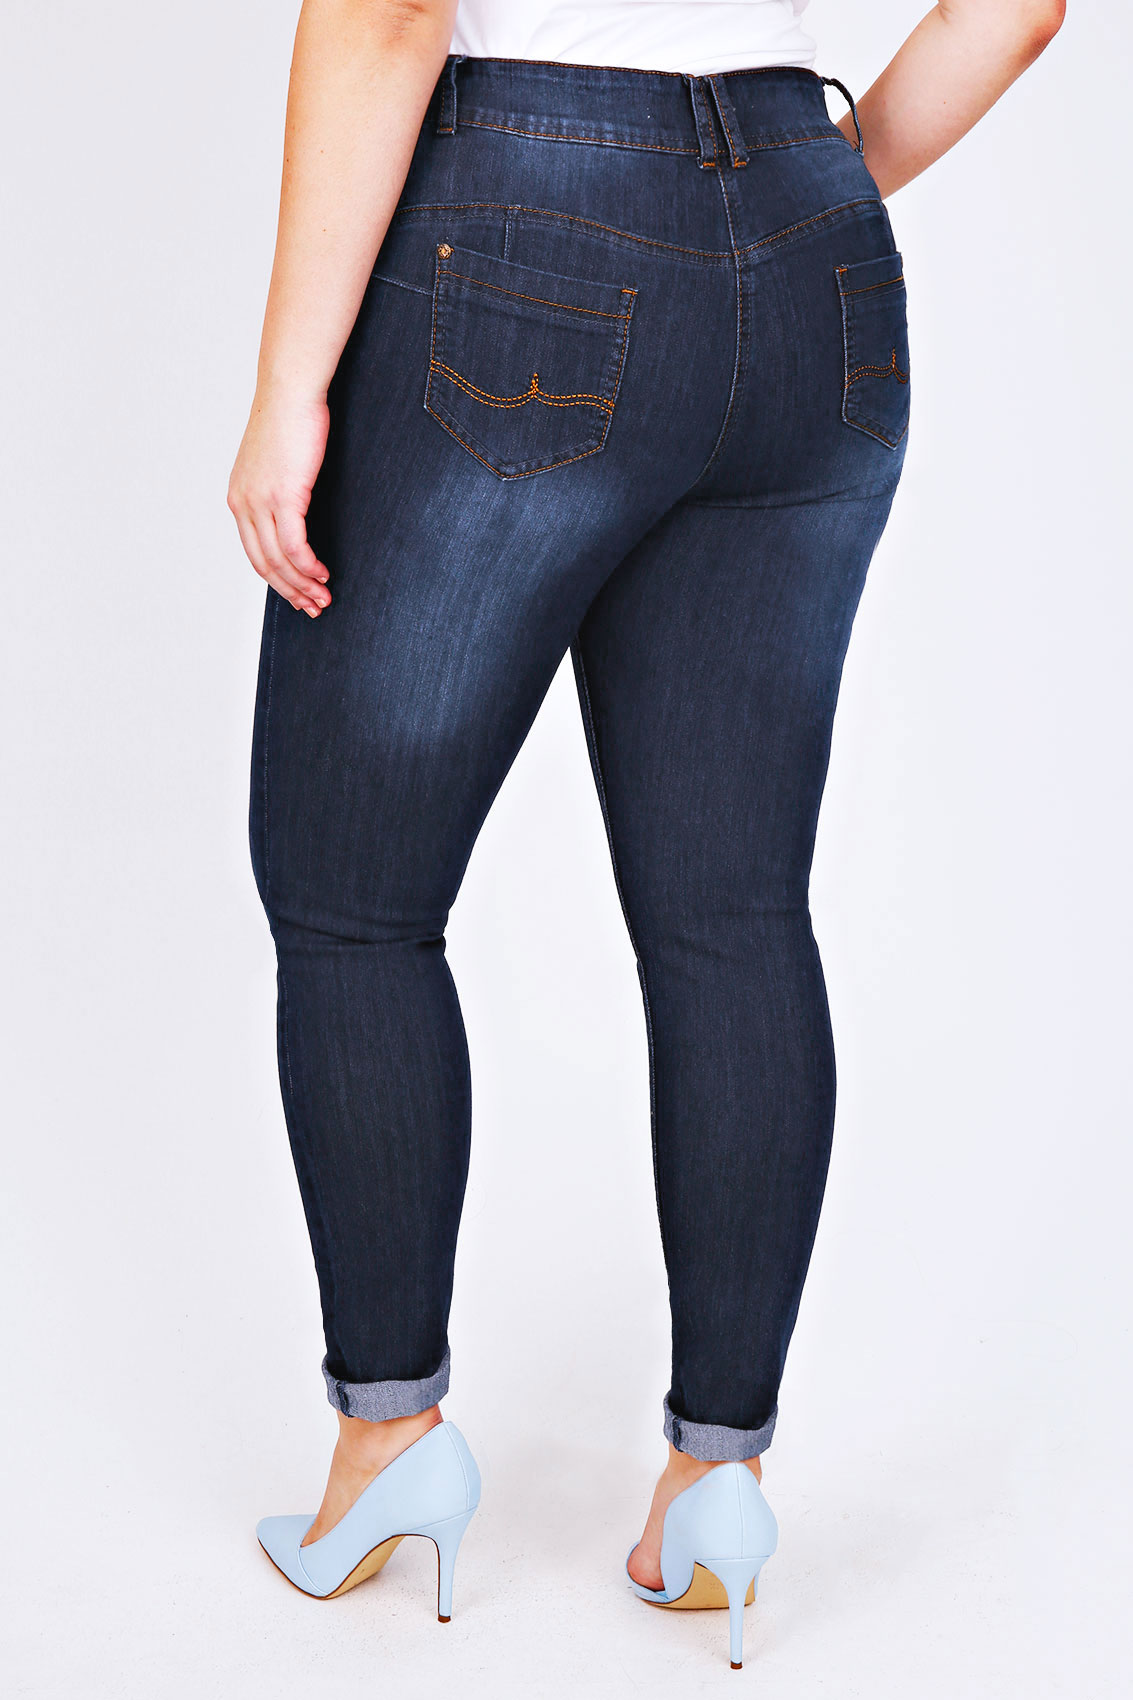 Indigo Skinny Shaper Jeans Available in 30